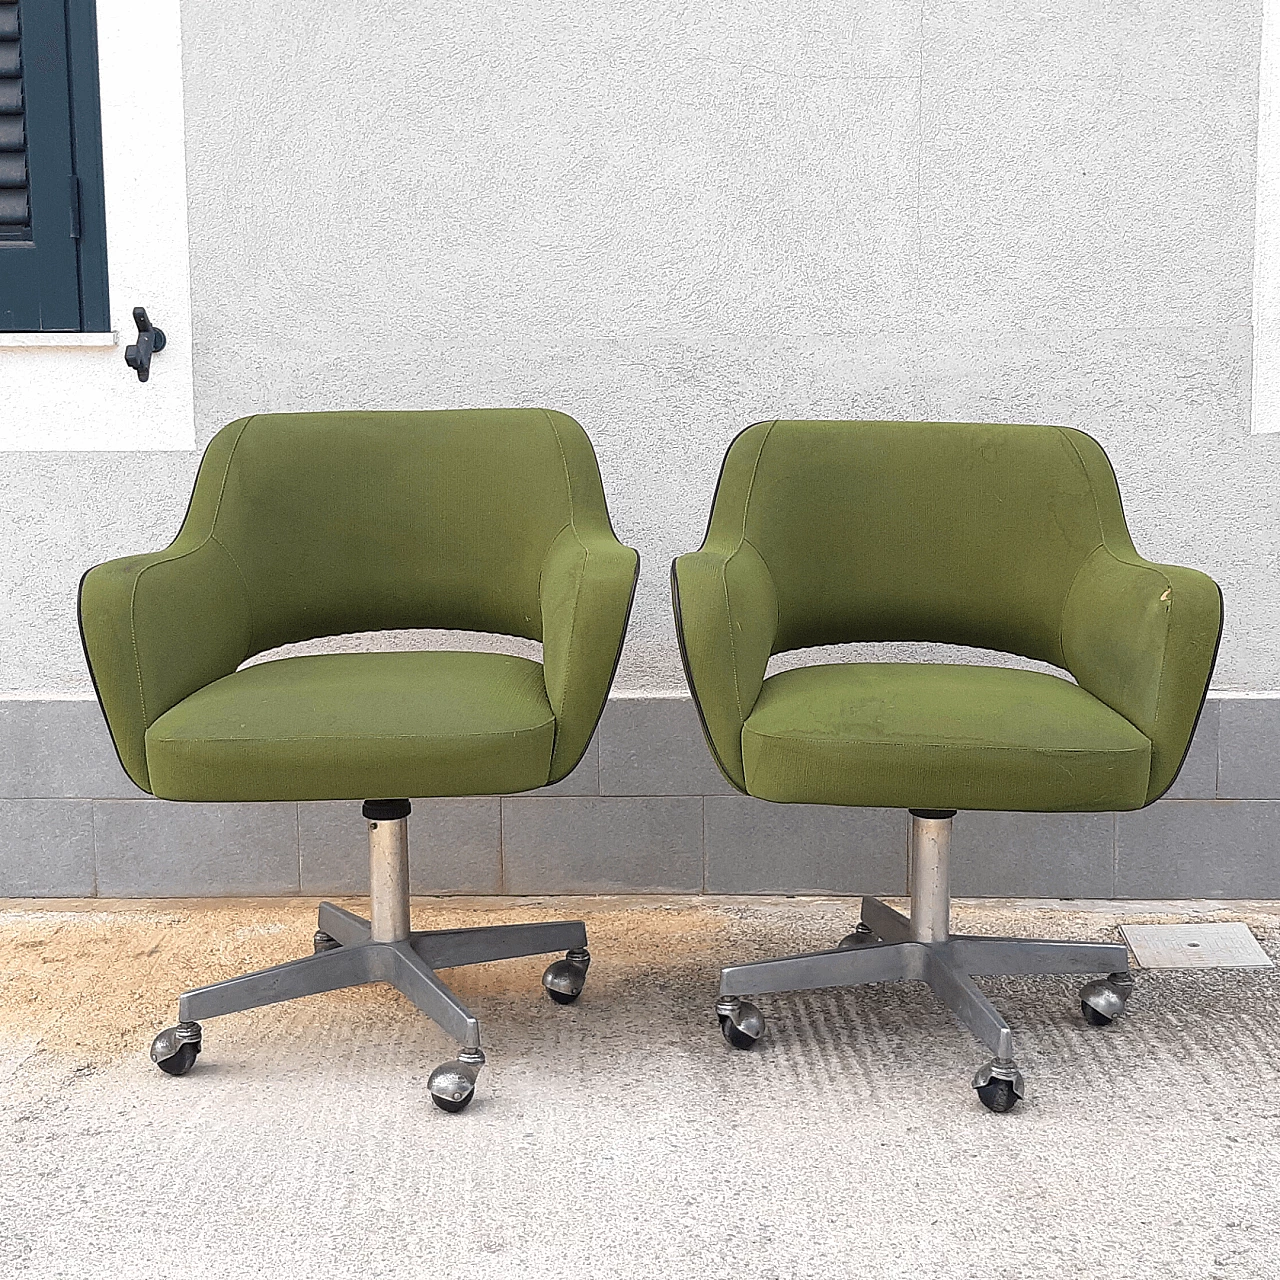 Swivel armchair by Mobiltecnica, 60s, 4 available 1339807